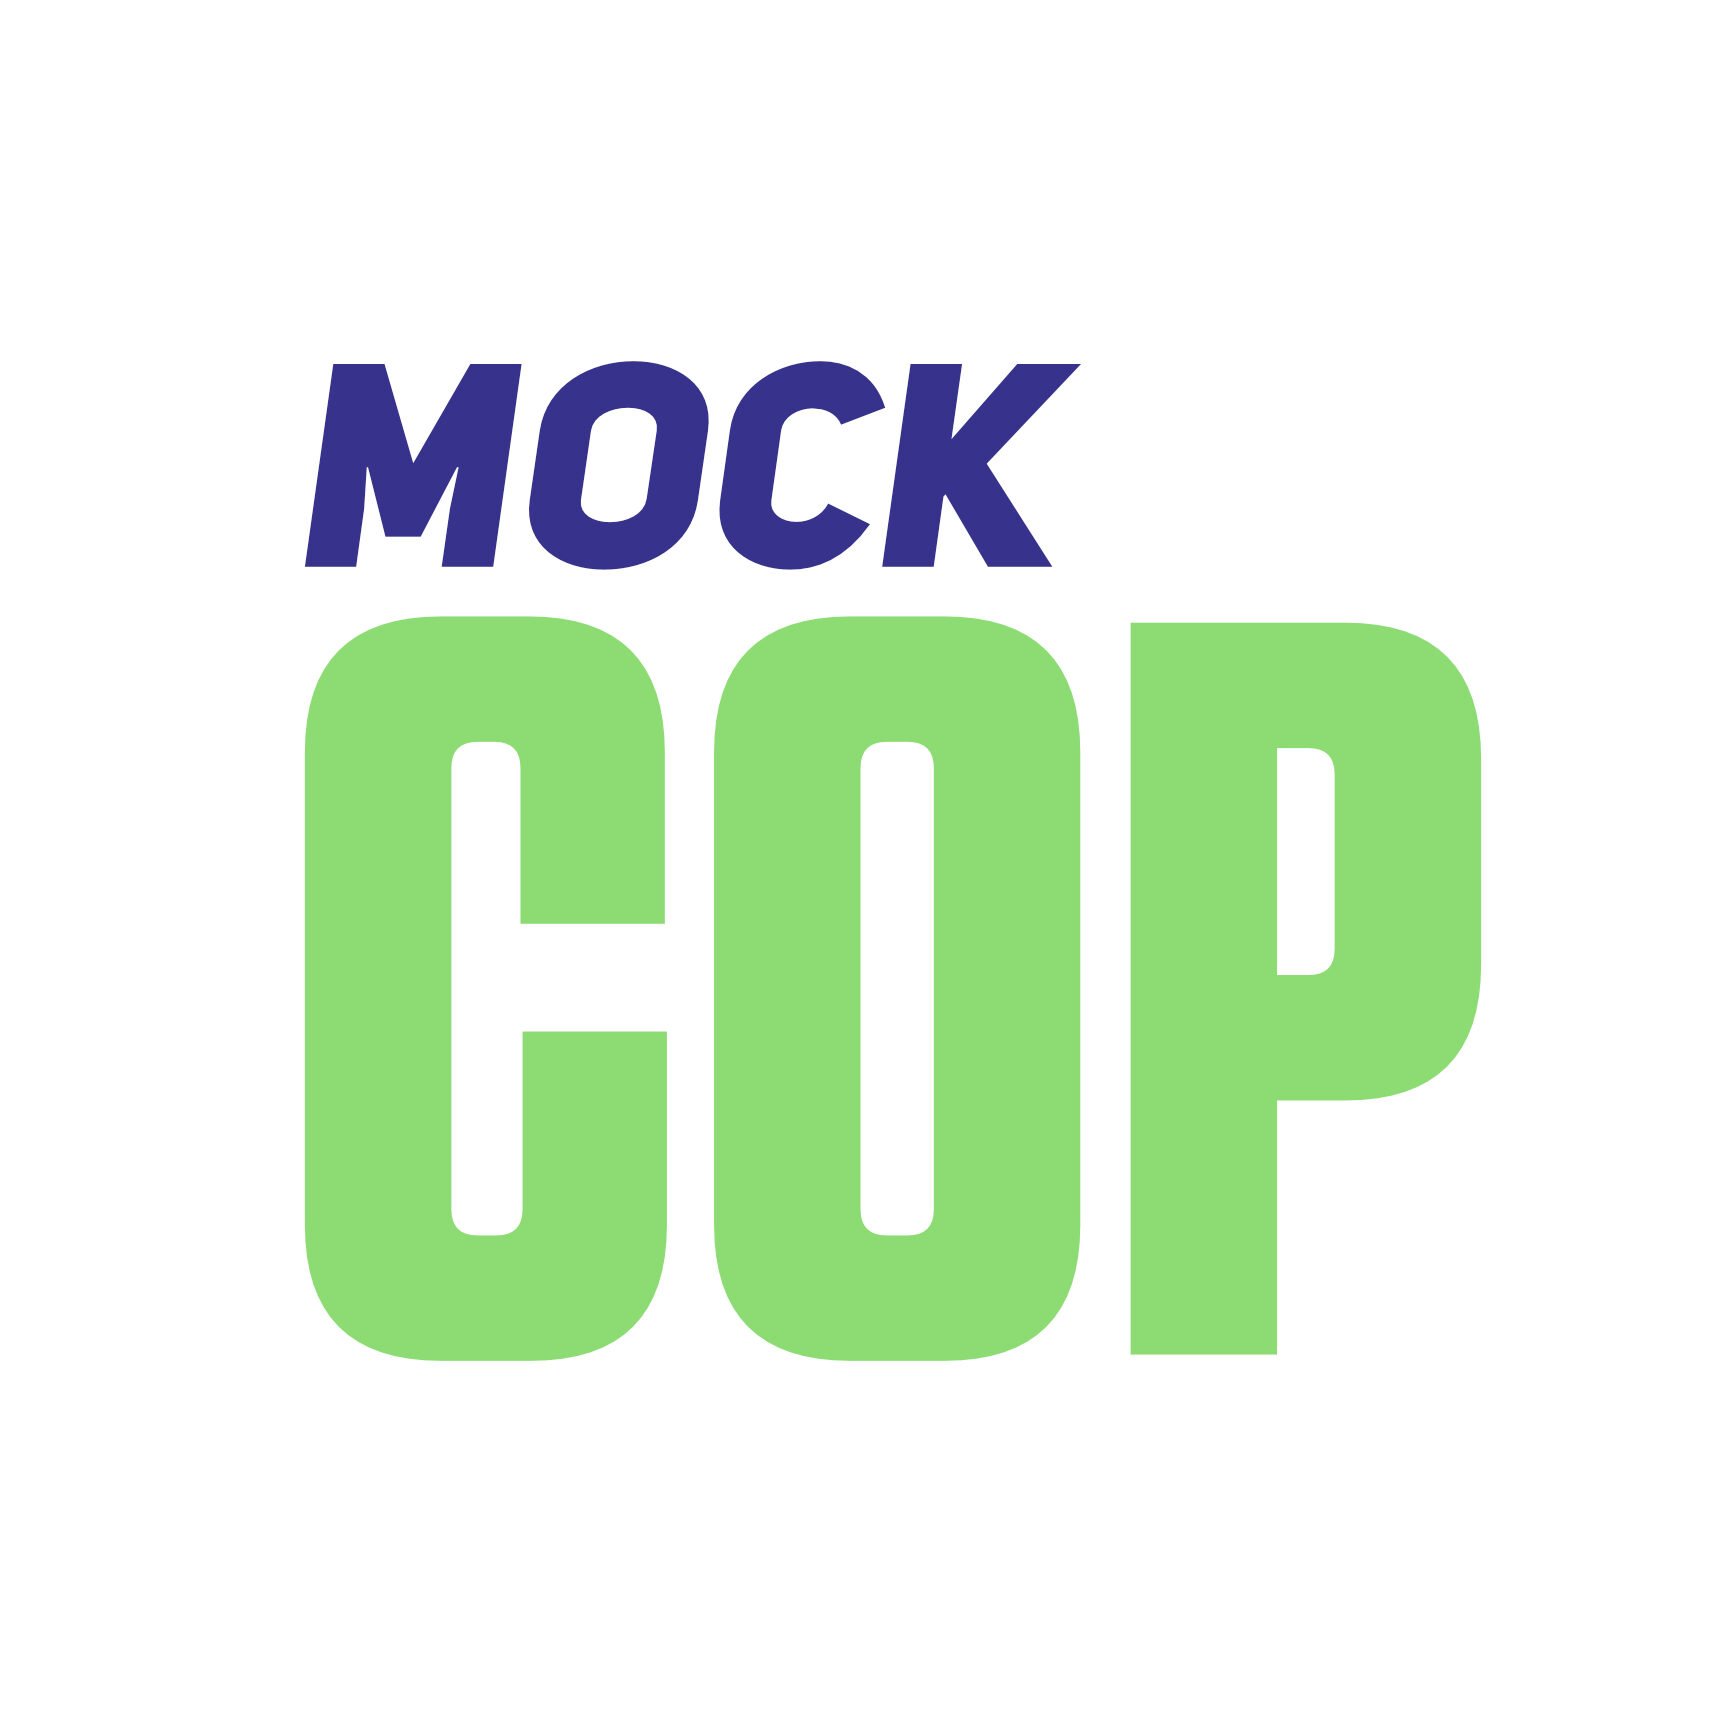 Mock COP Campaigners Progress & National Governments Commitments